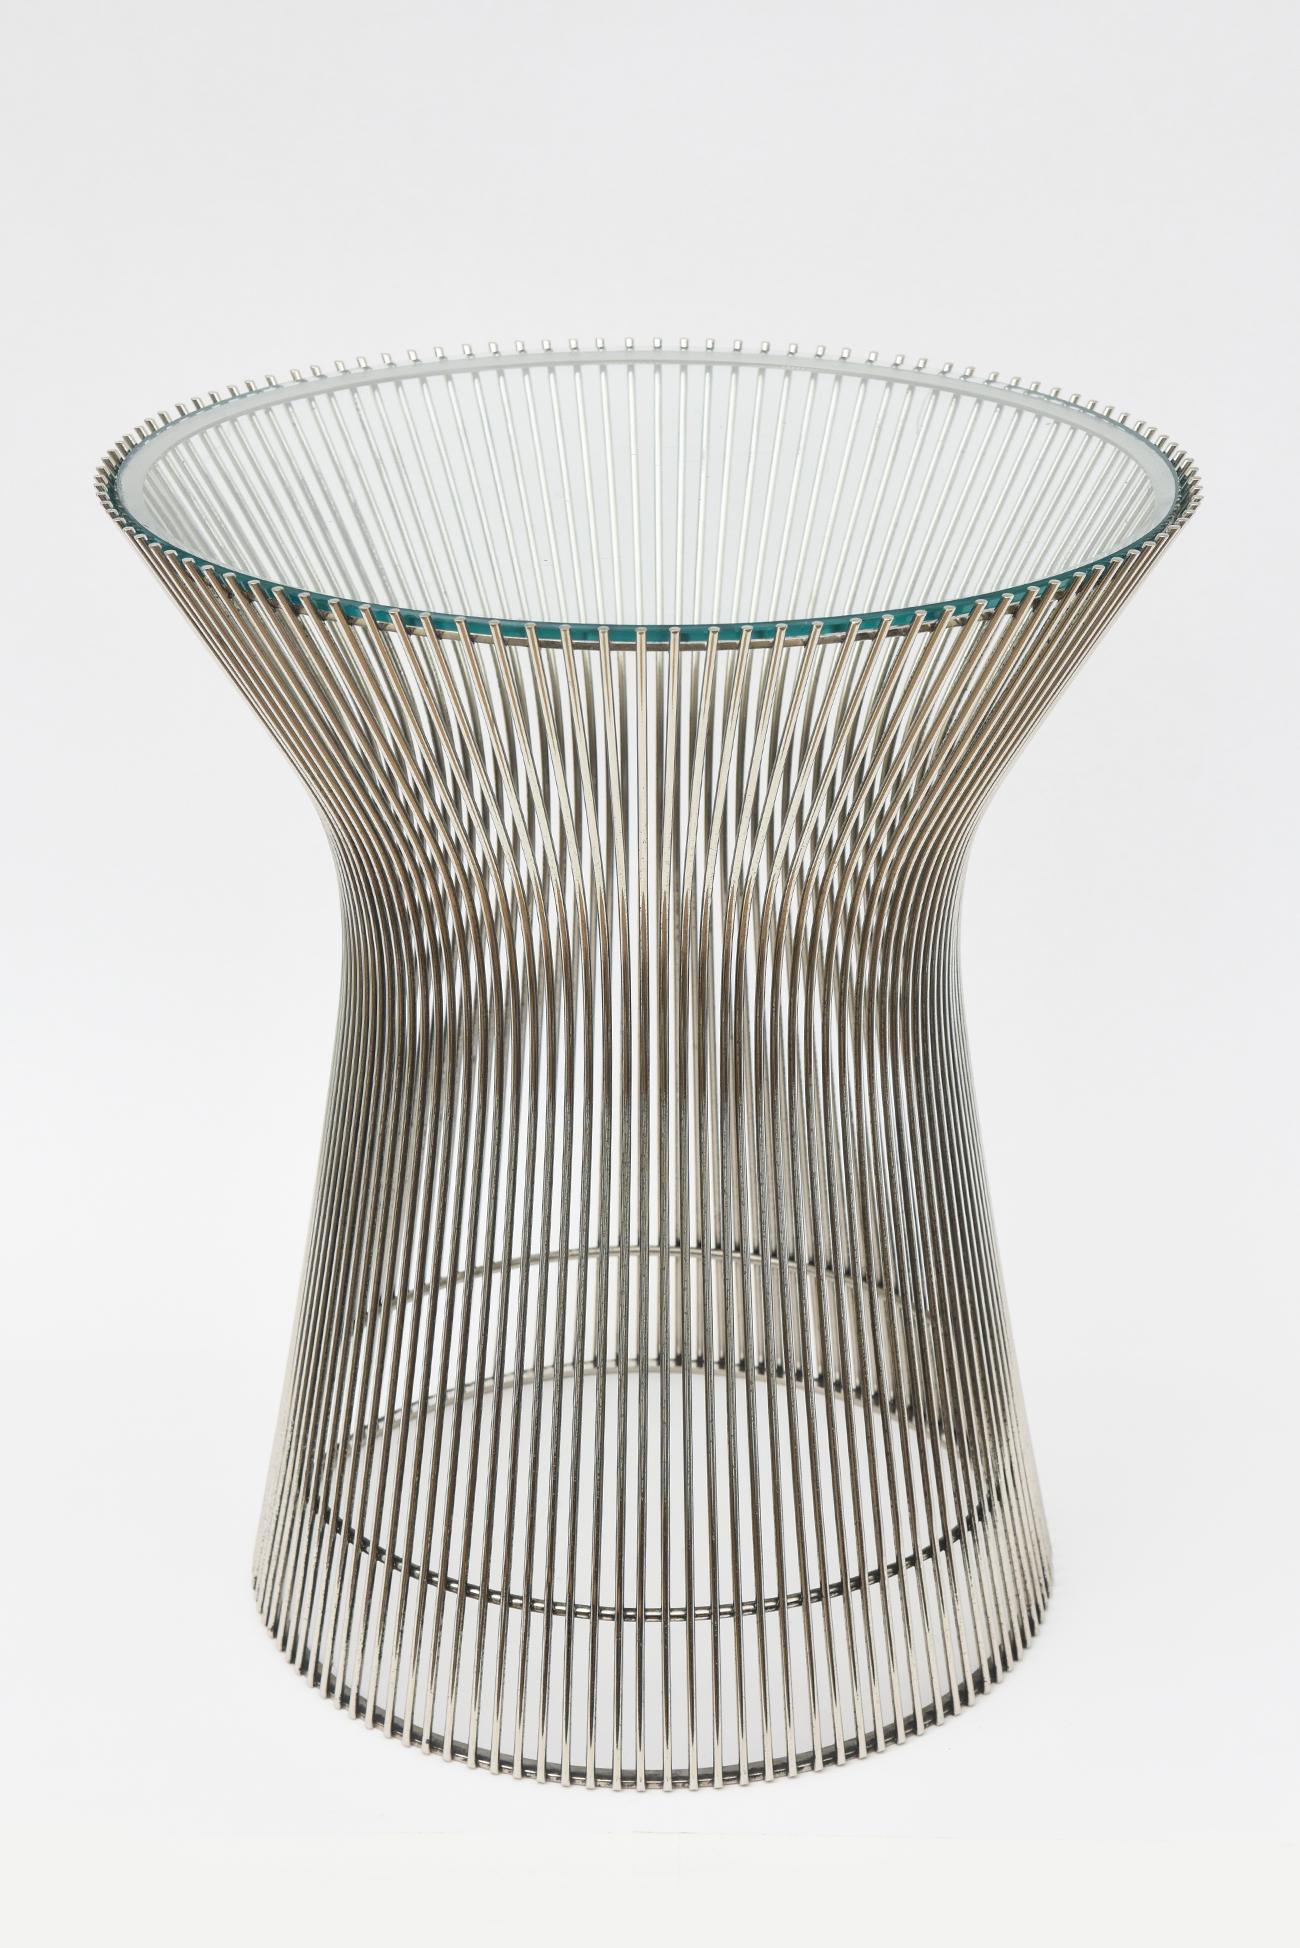 Warren Platner Restored Wire Nickel Plated over Chrome Side Table Mid Century For Sale 4